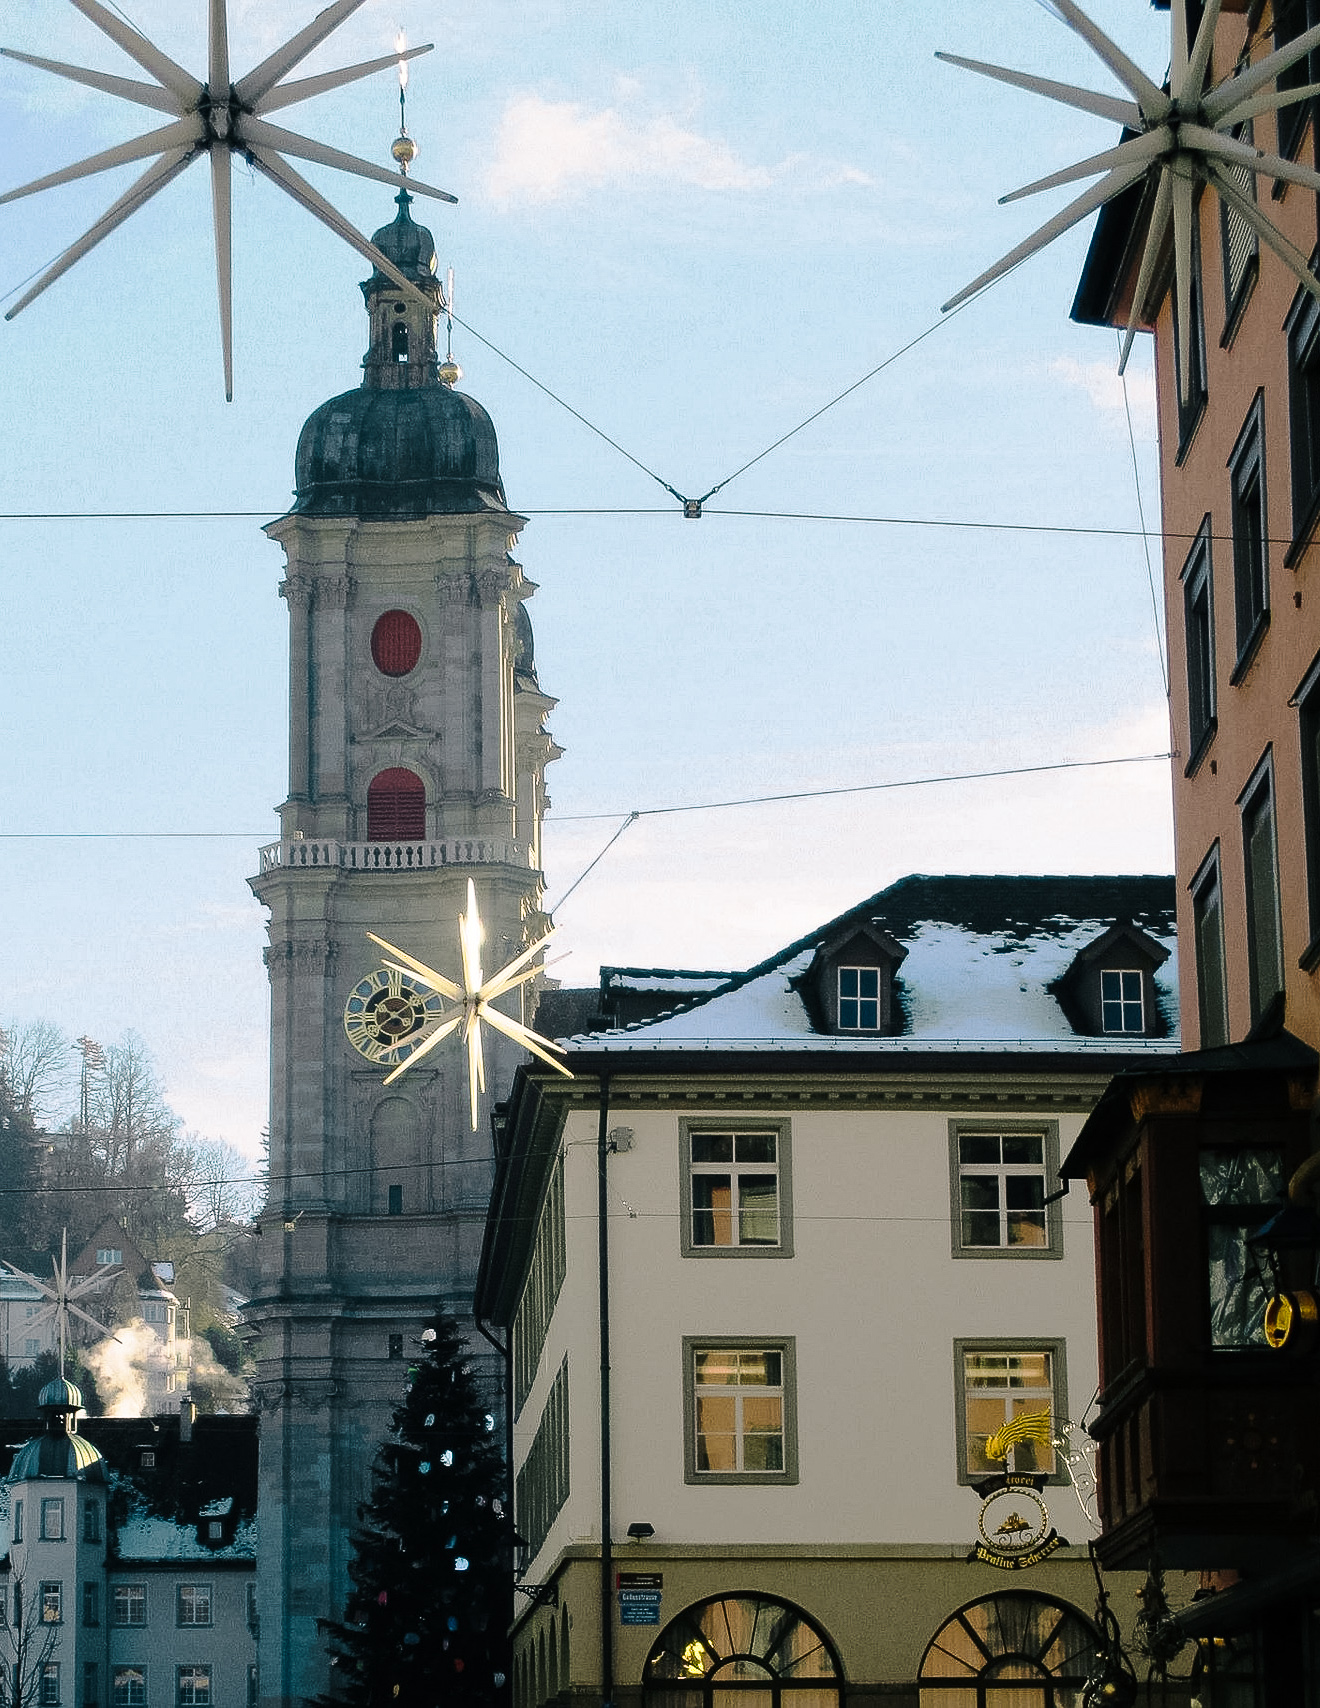 a view of St. Gallen catherdral in winter with christmas stars and decor in the square in front of it